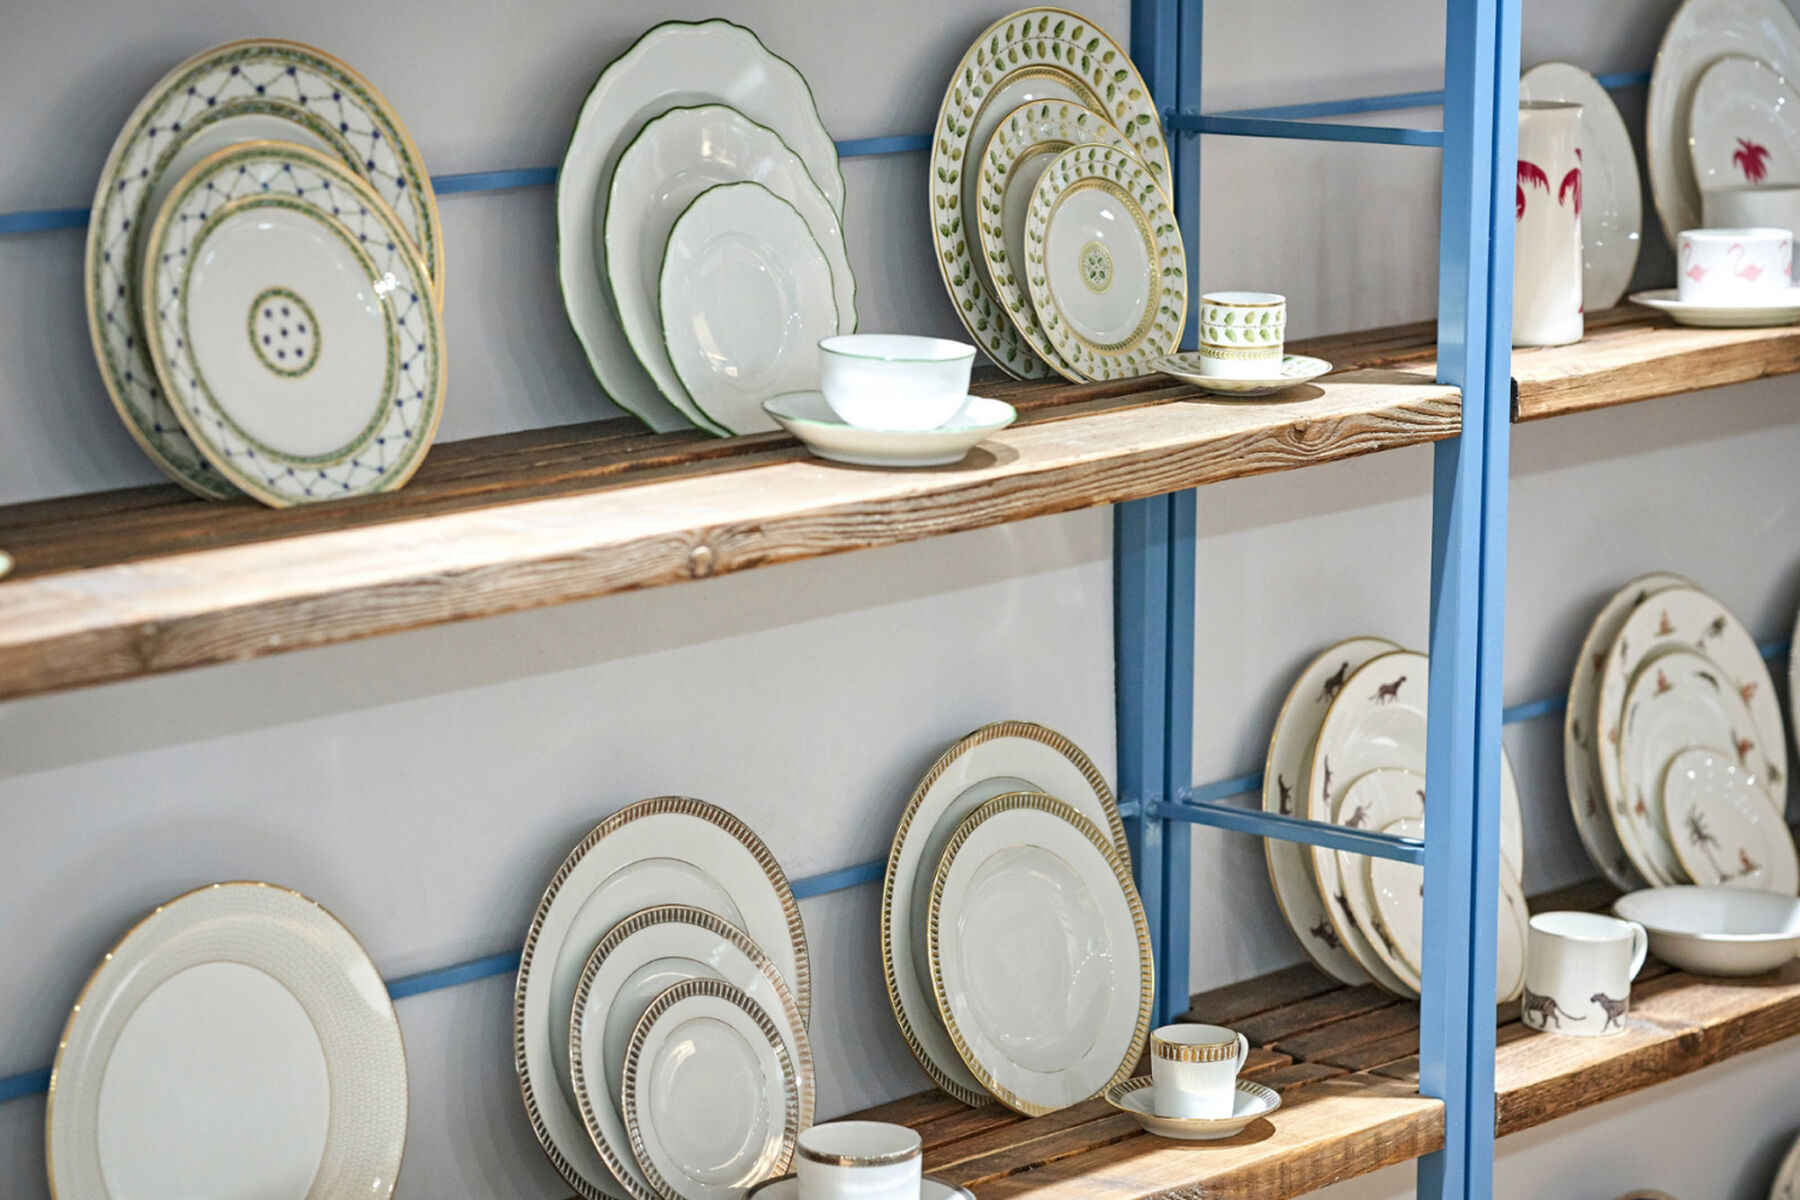 The Wedding Present Company - Elegant modern tableware and dinner sets. Charger plates, dinner plates, cups and saucers.